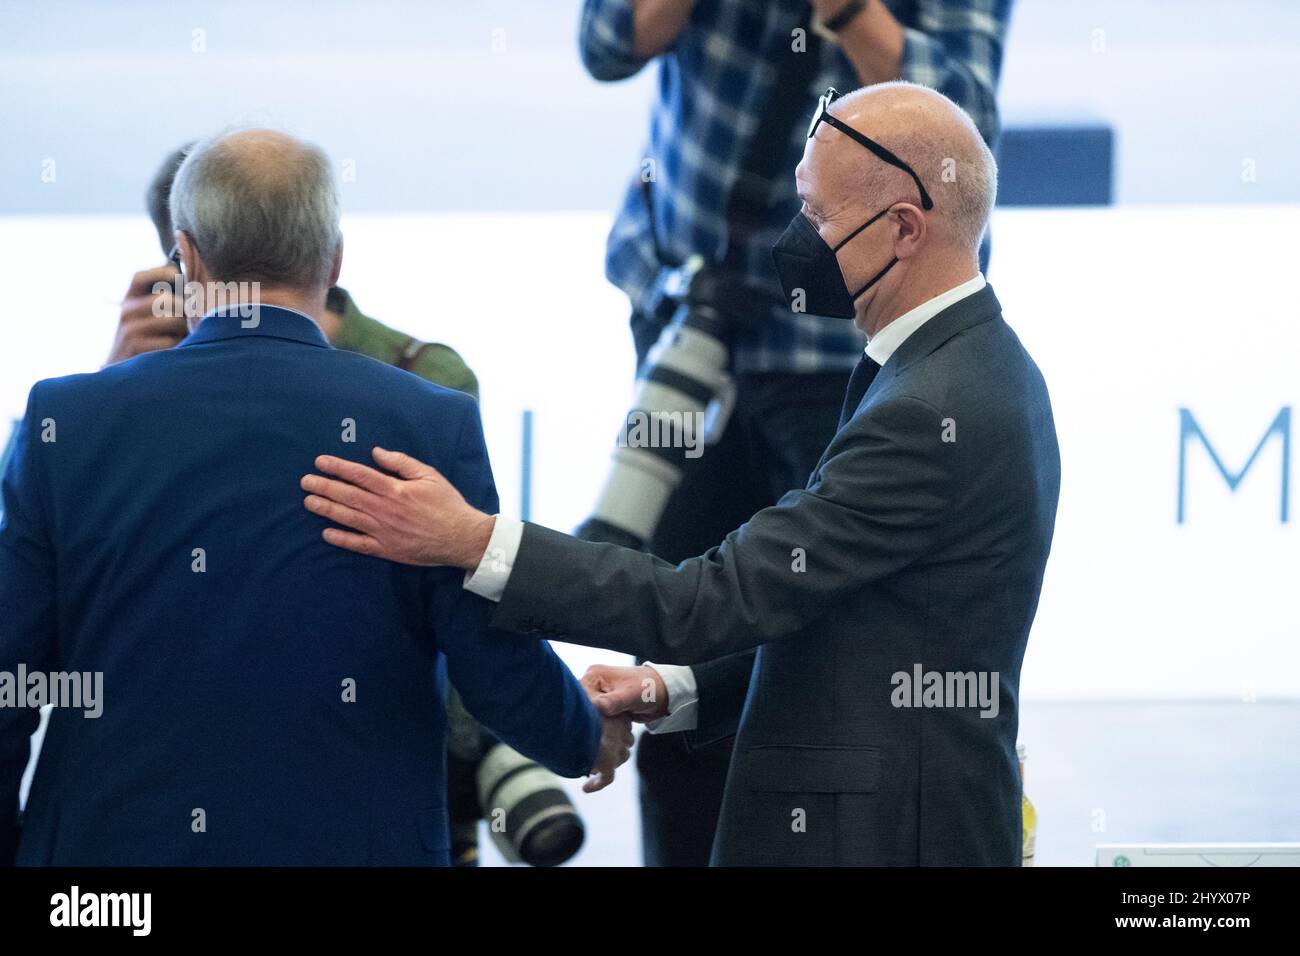 left to right Peter PETERS, candidate for DFB President, congratulates Bernd NEUENDORF on his election as DFB President, 44th Ordinary DFB Bundestag on March 11th, 2022 in Bonn/ Germany. Â Stock Photo